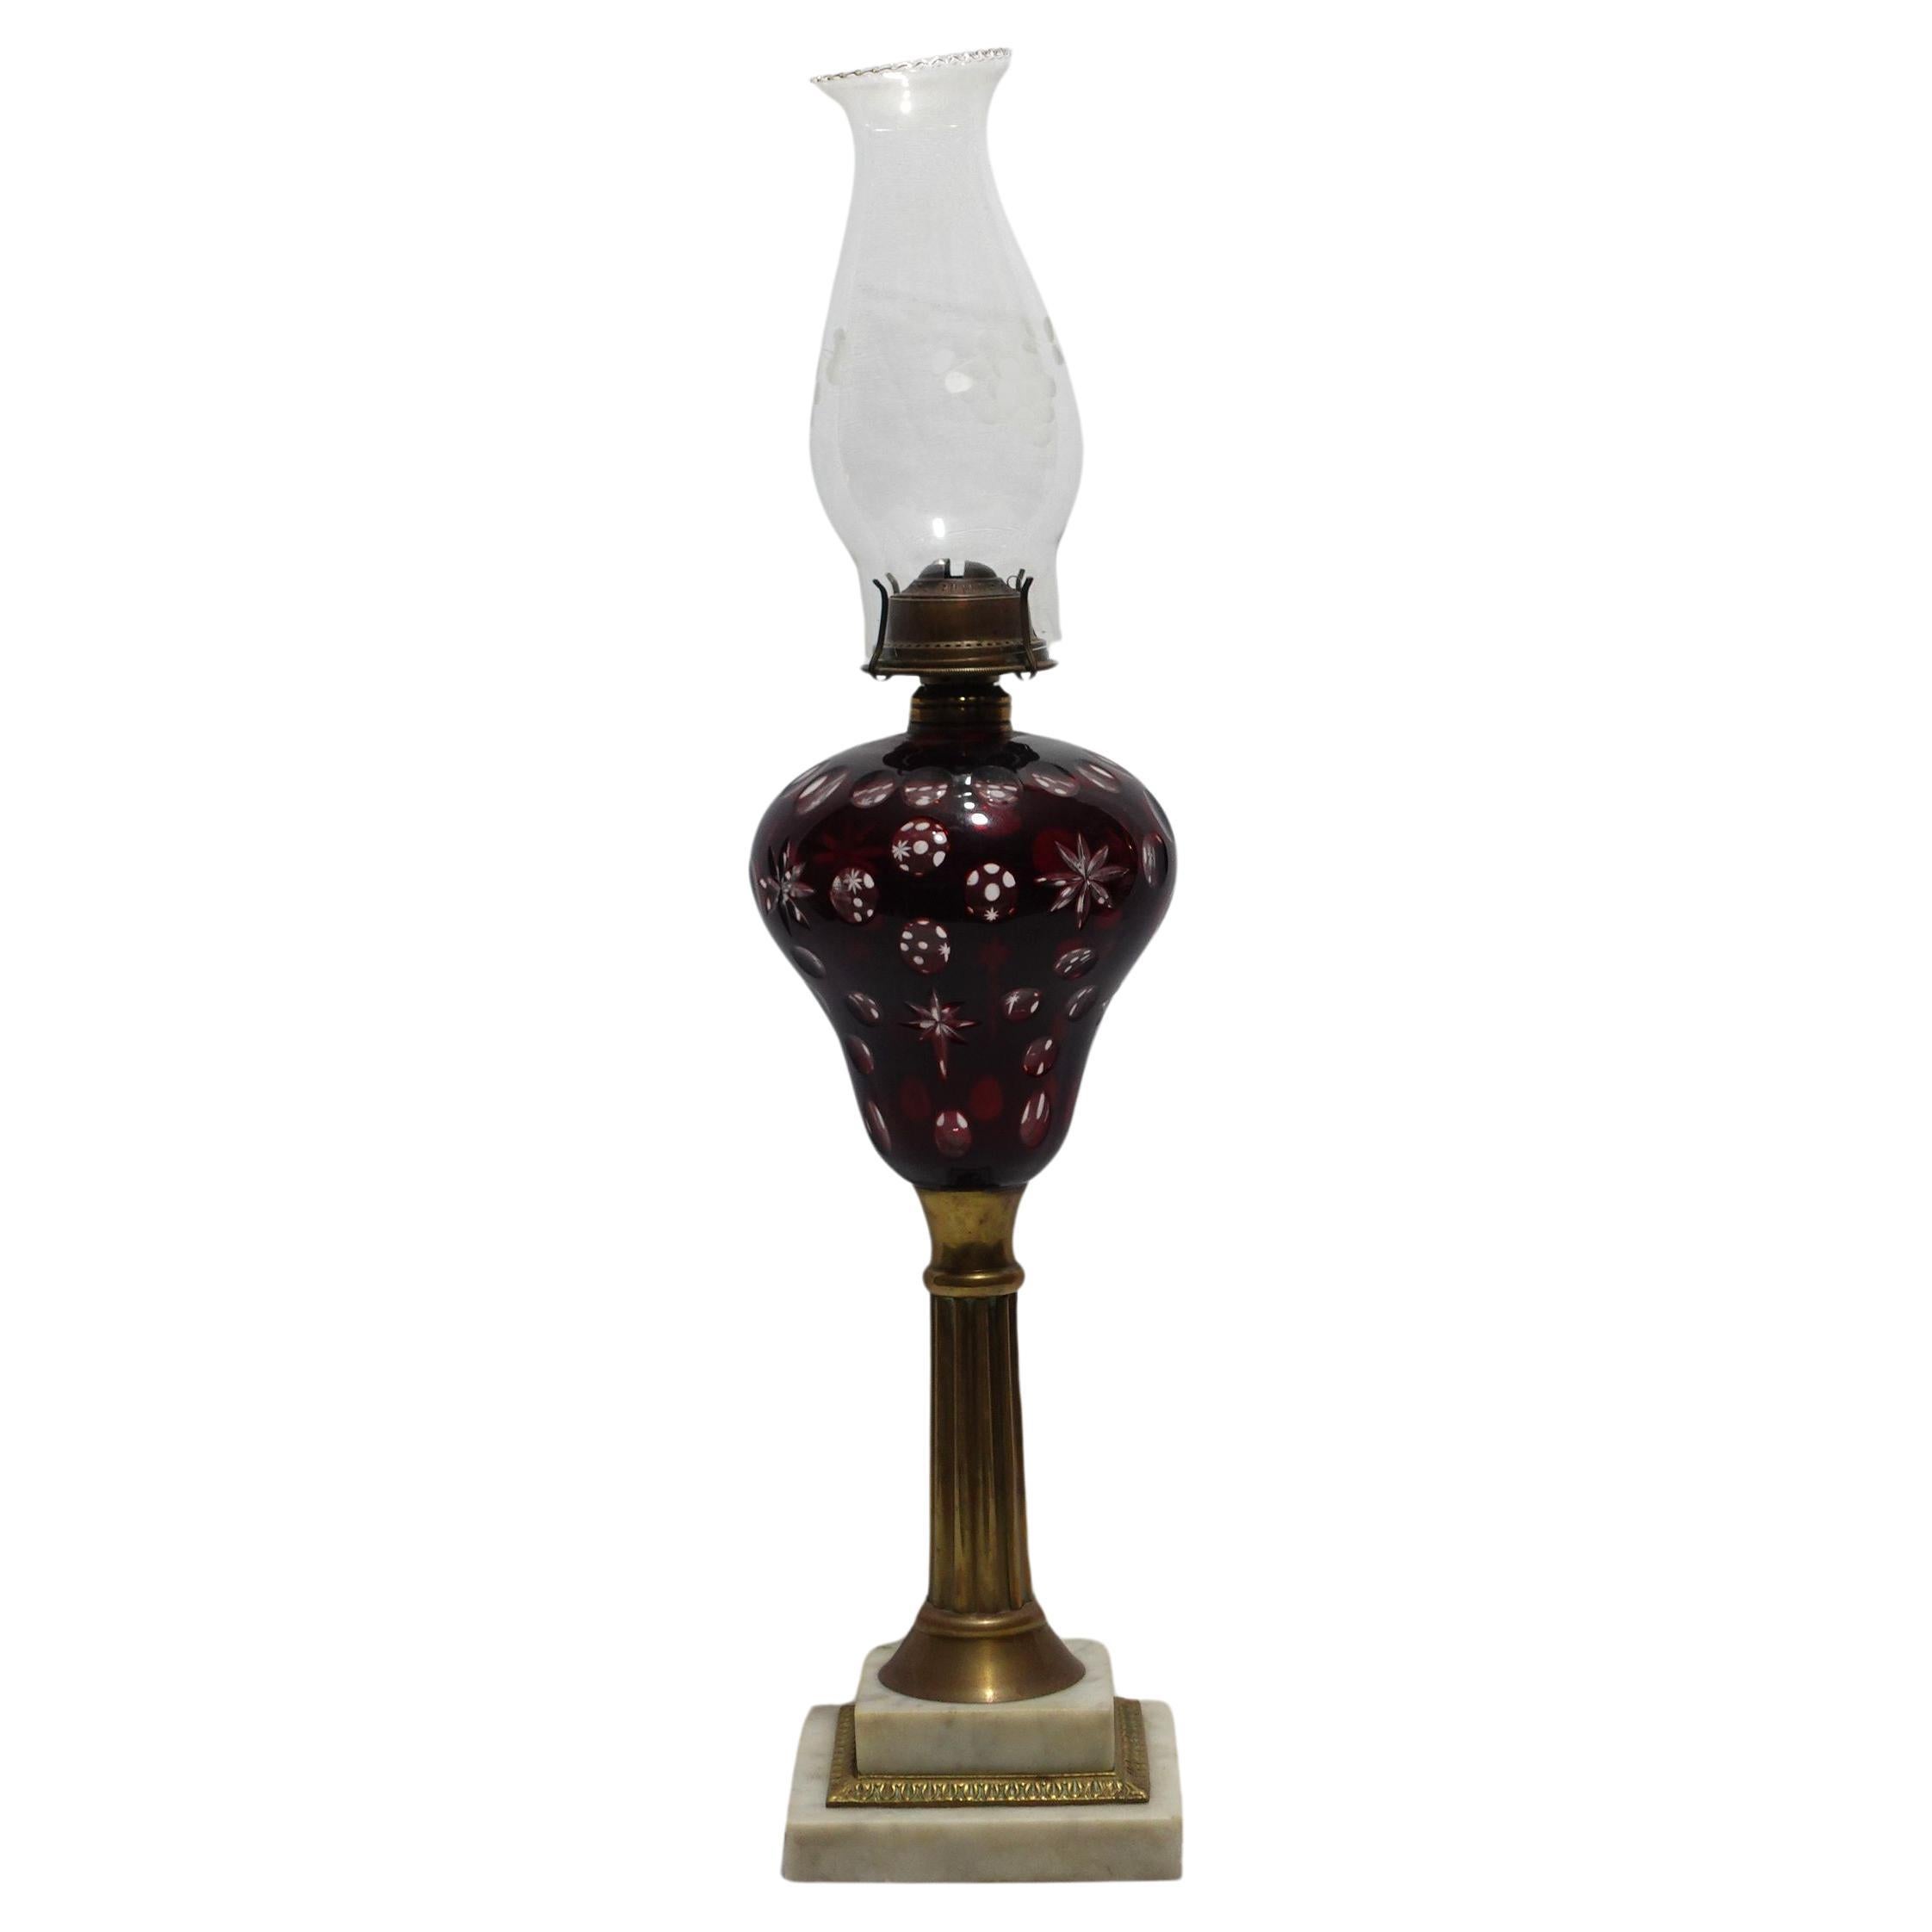 An Old Cranberry Cut To Clear Fluid Lamp For Sale